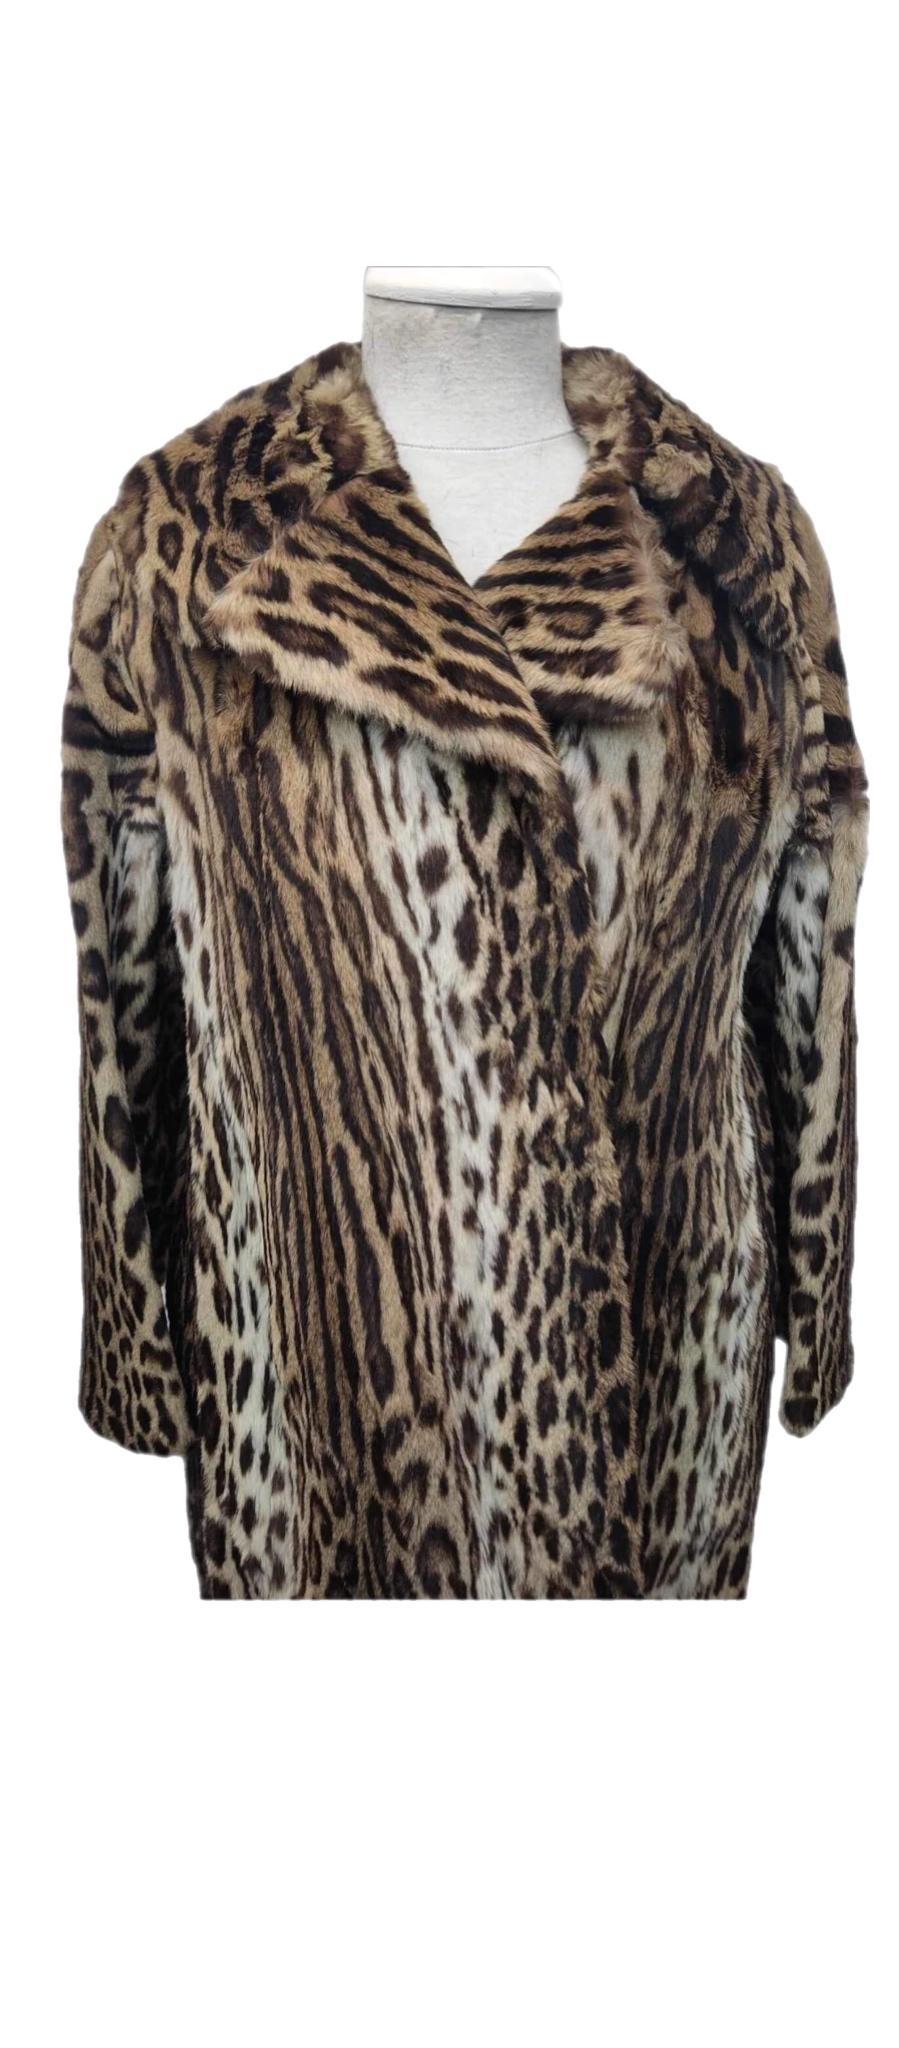 Mint Vintage Christian Dior ocelot fur coat size 12*****Vault unused no defects In New Condition For Sale In Montreal, Quebec